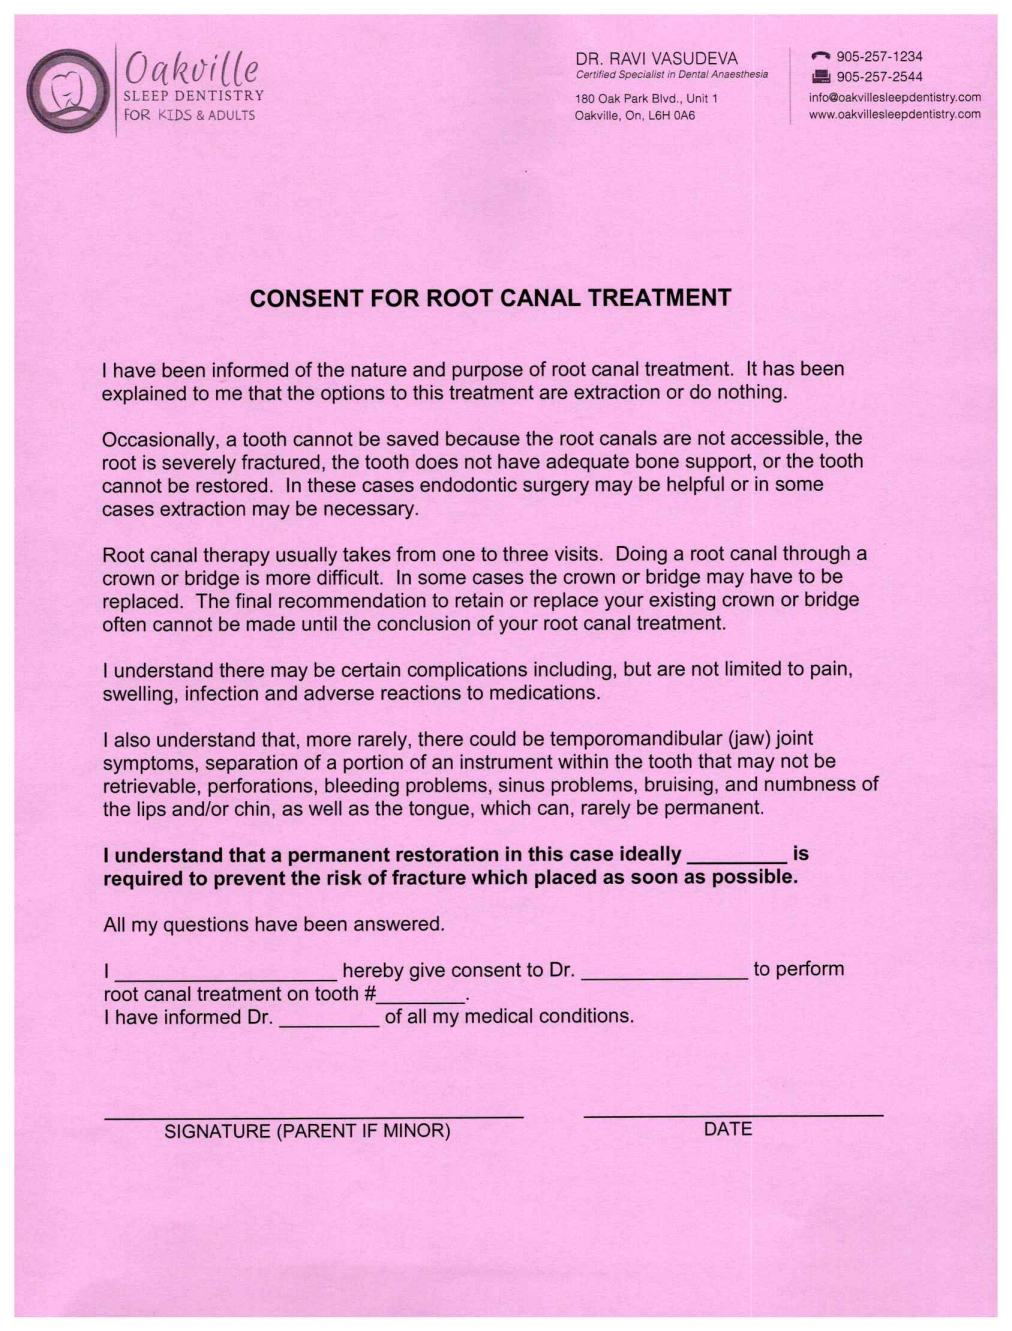 Consent For Root Canal Treatment Form